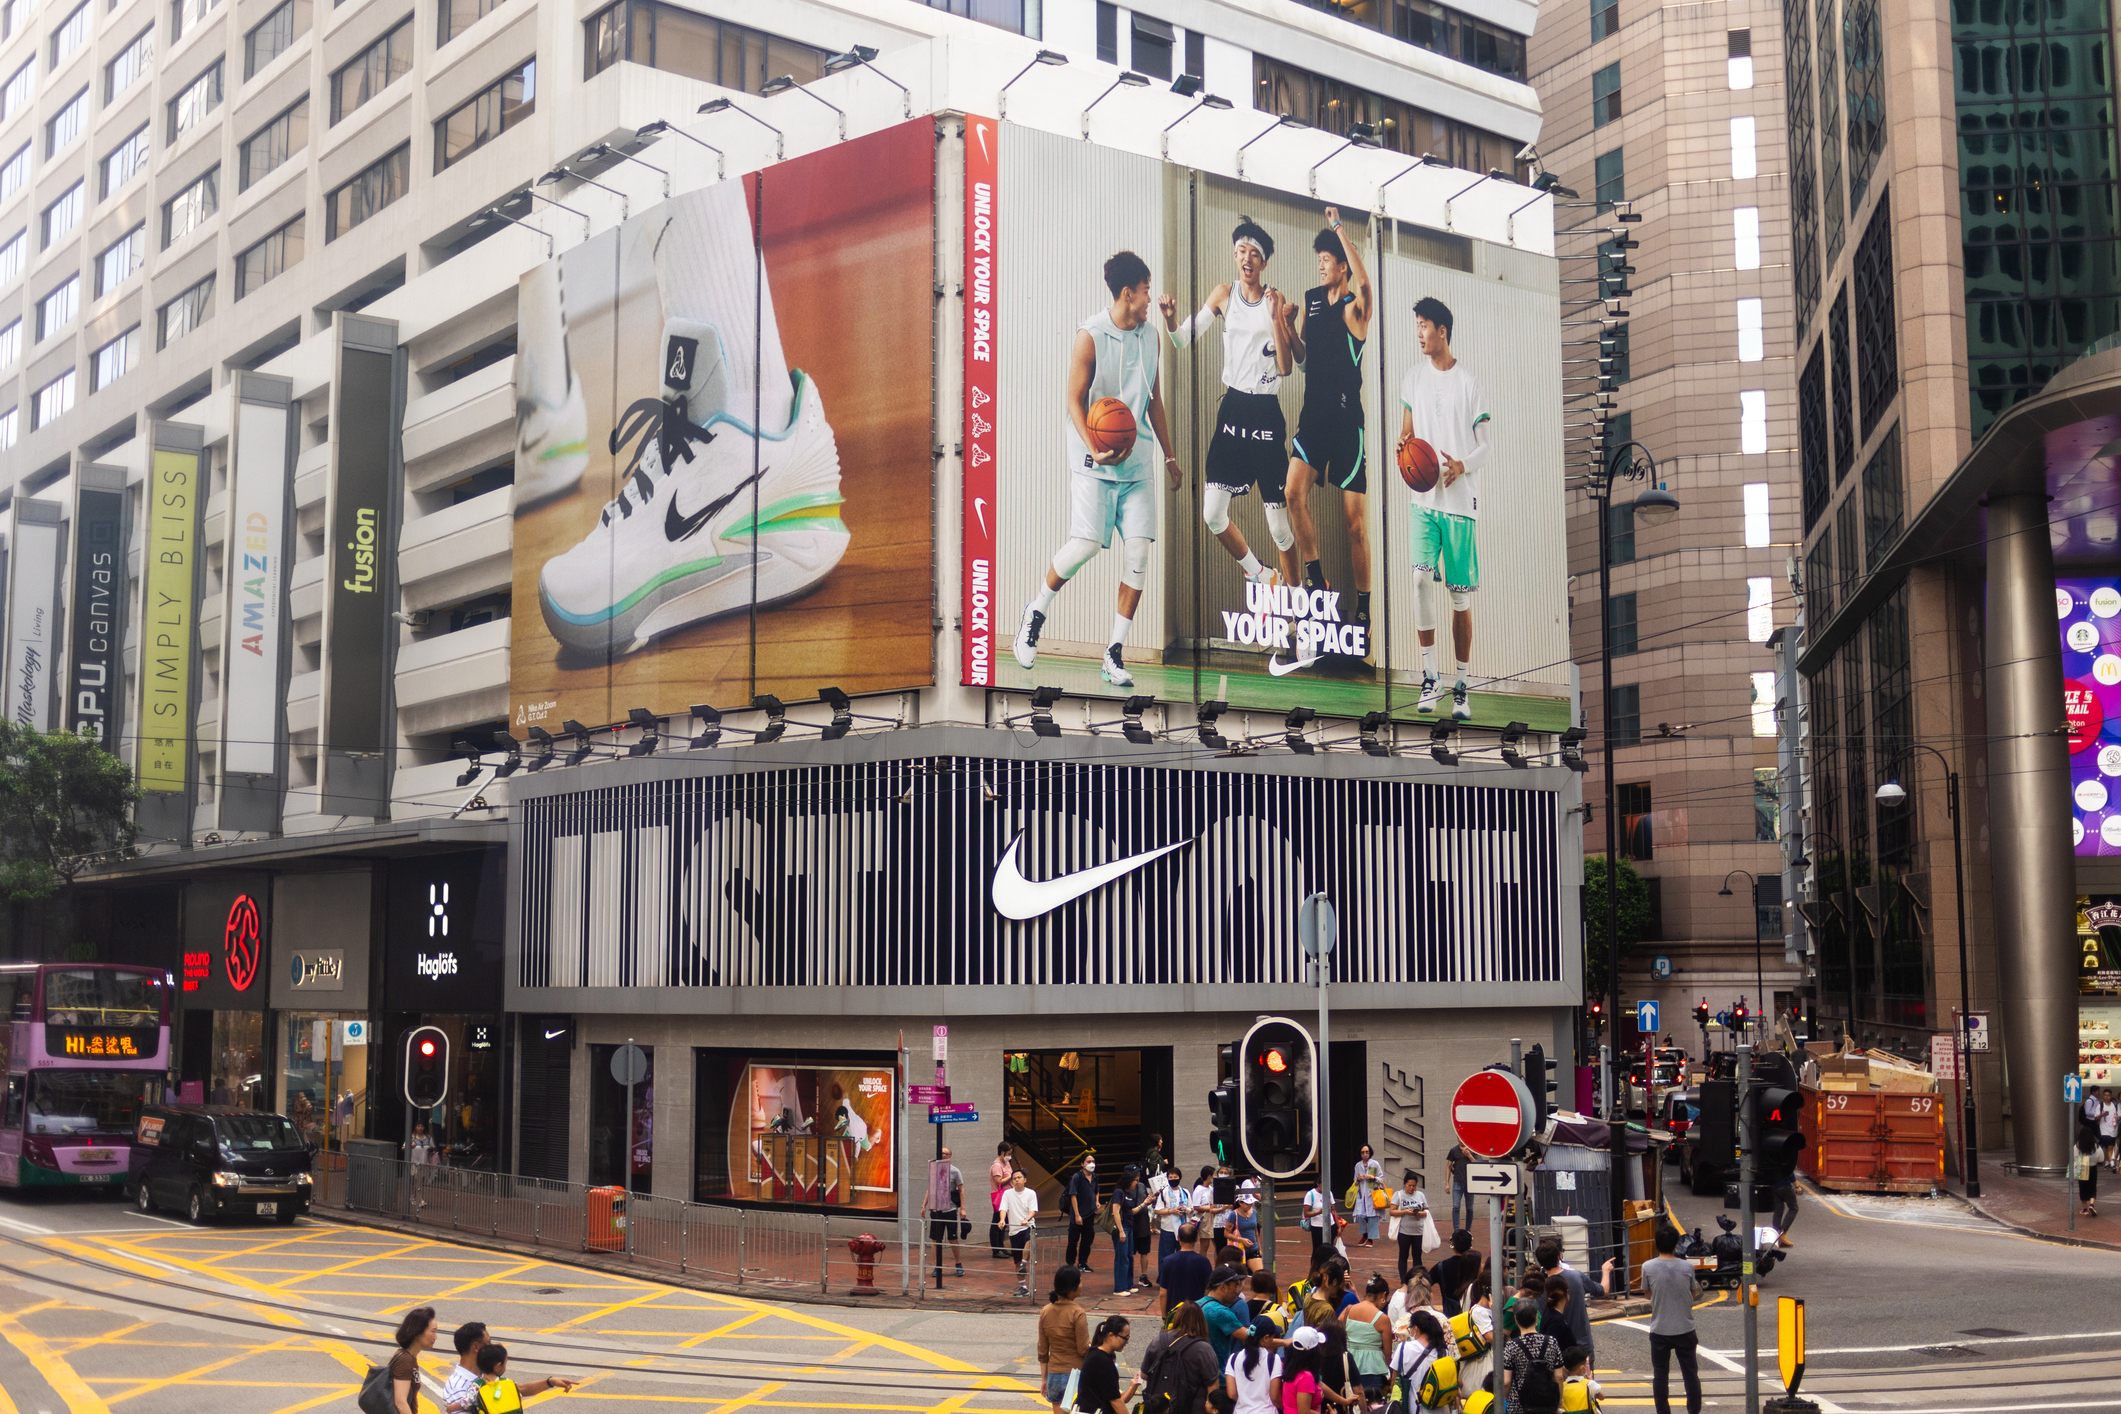 Nike storefront on a busy street in Hong Kong demonstrating their universal marketing message.